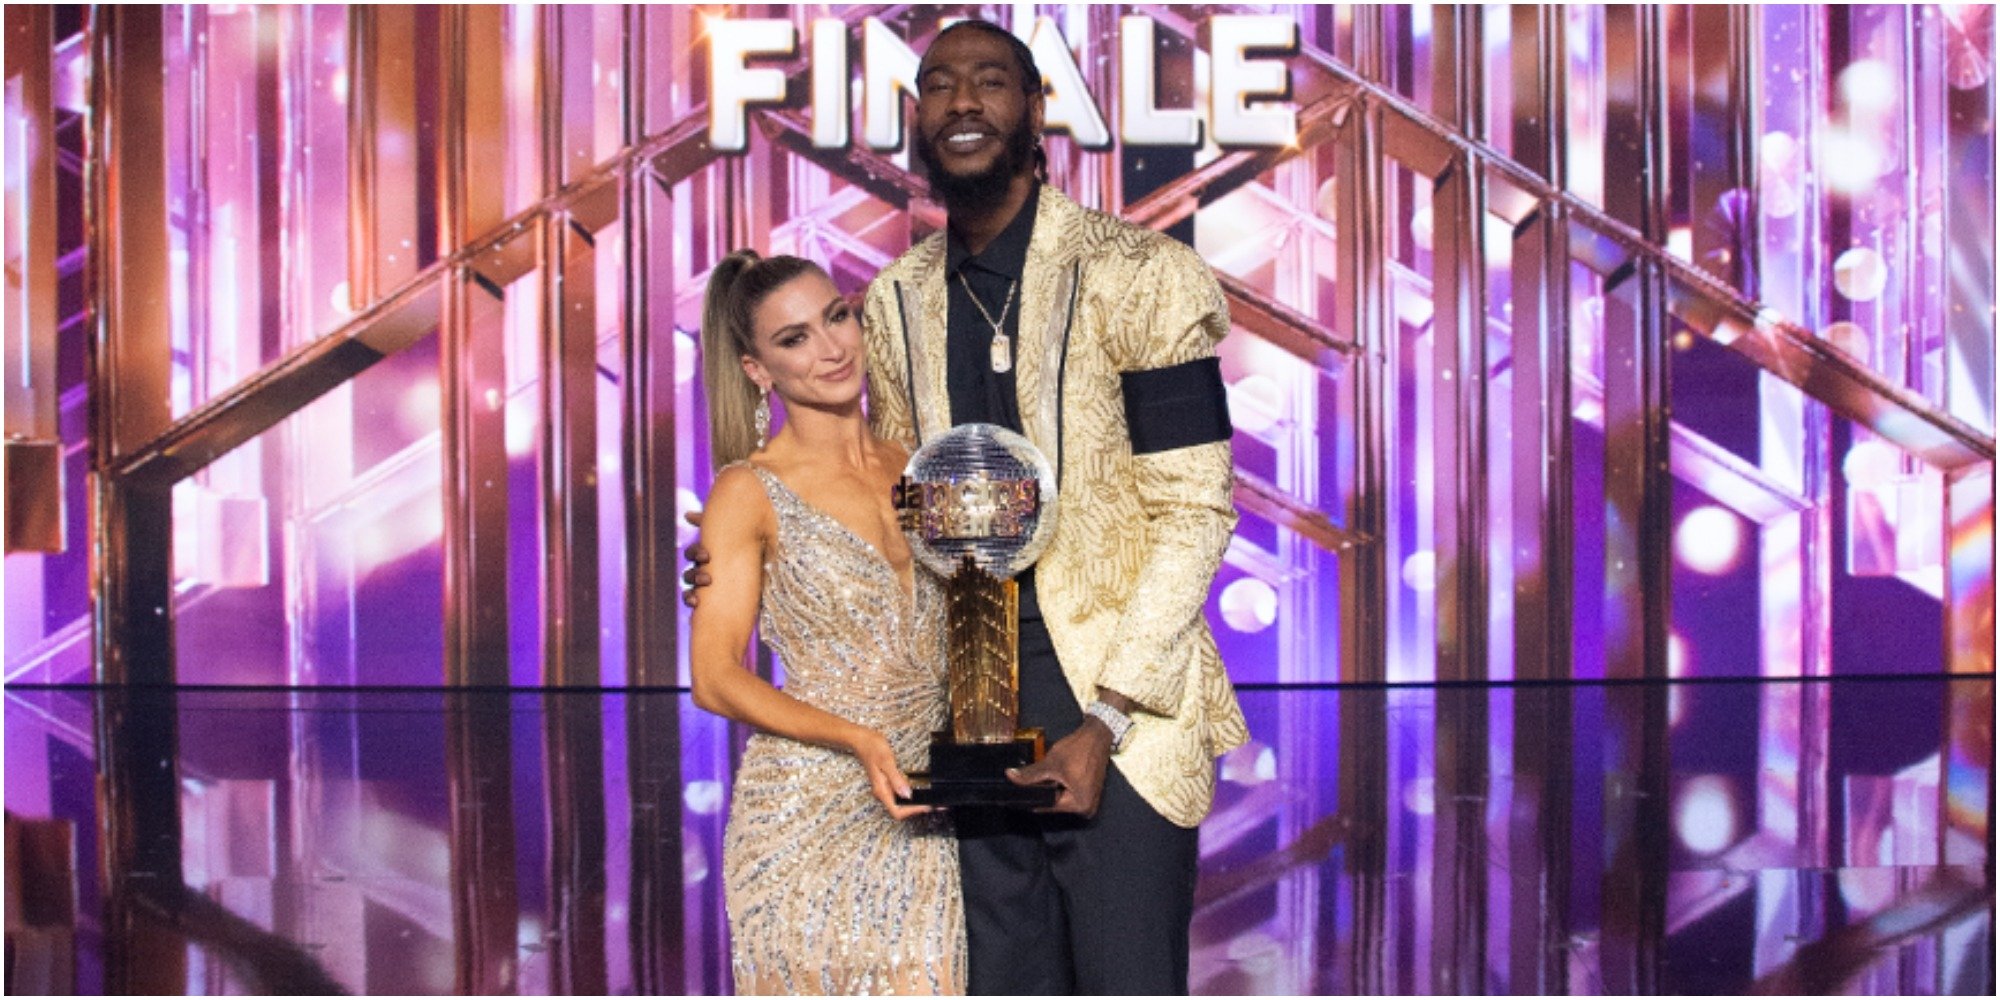 Iman Shumpert and Daniella Karagach pose with mirrorball on Dancing with the Stars.